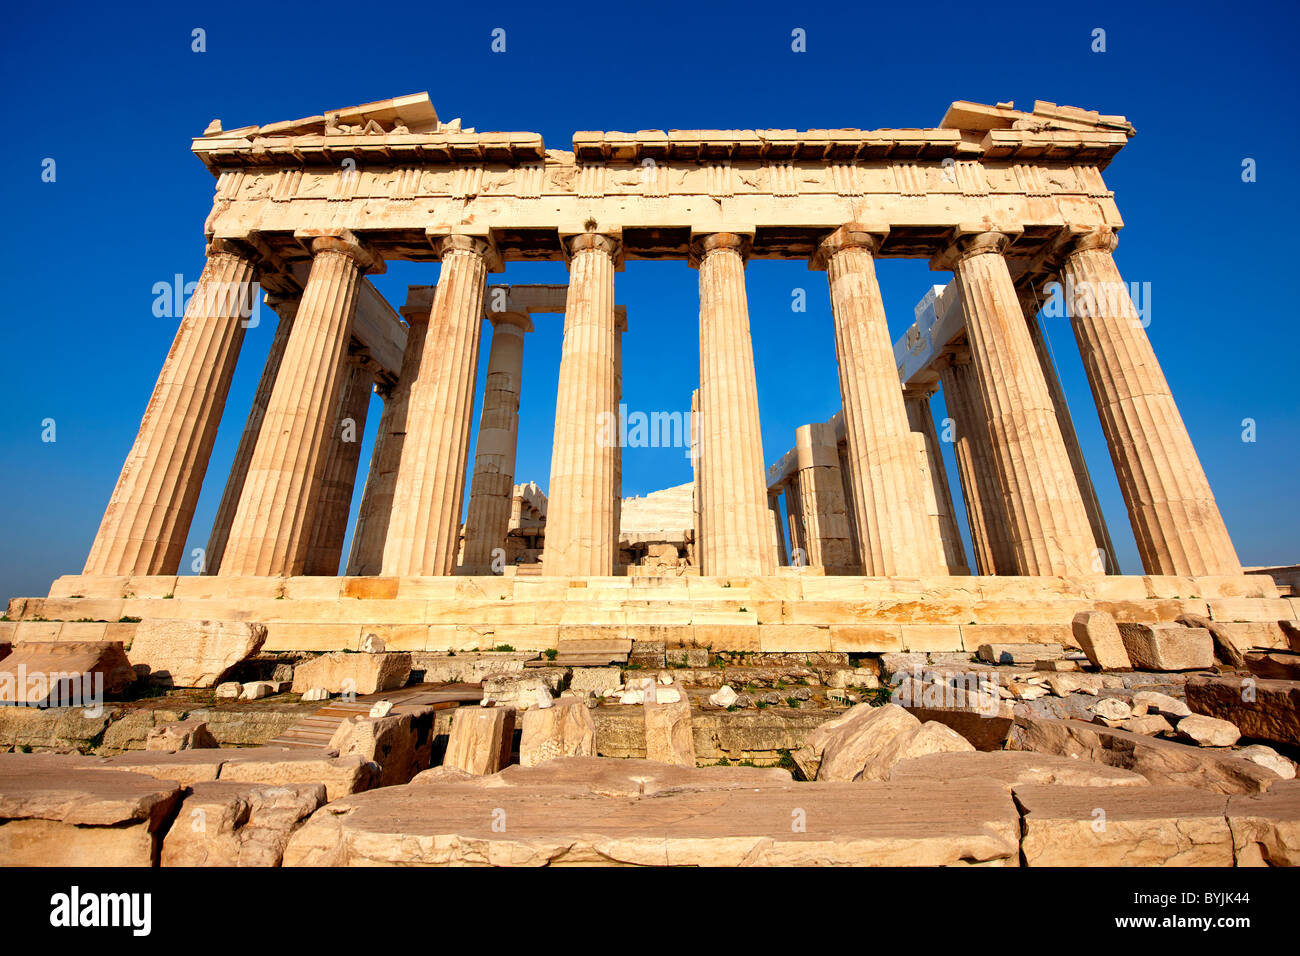 The Parthenon Temple ancient greek temple, the Acropolis of Athens in Greece. Stock Photo